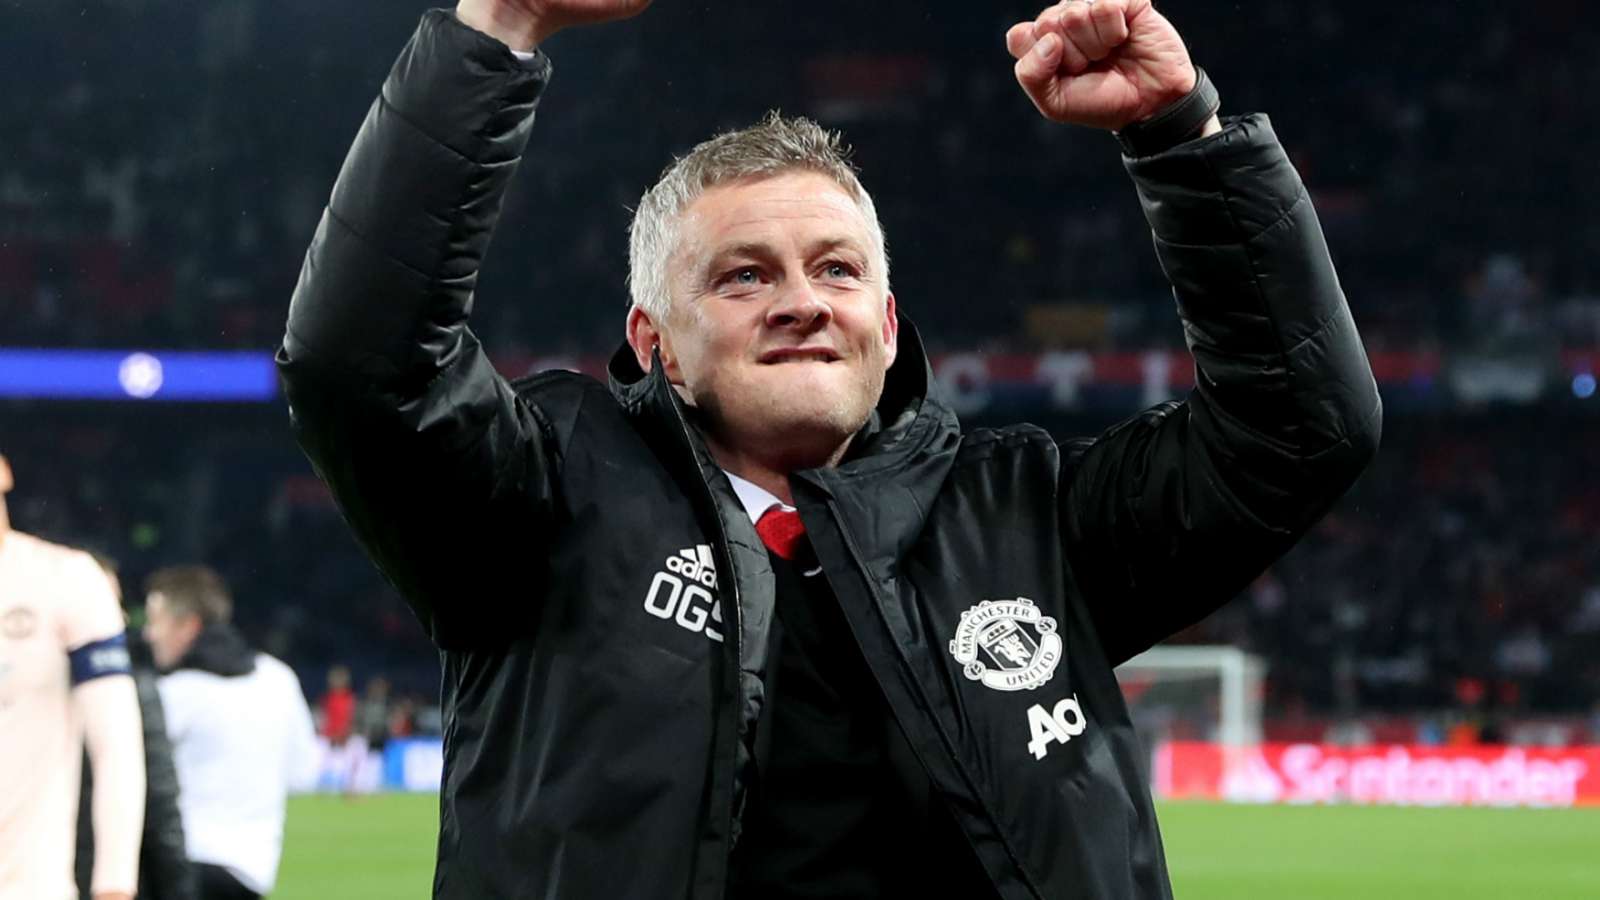 BREAKING: Manchester United Appoint Ole Solskjaer As Permanent Manager